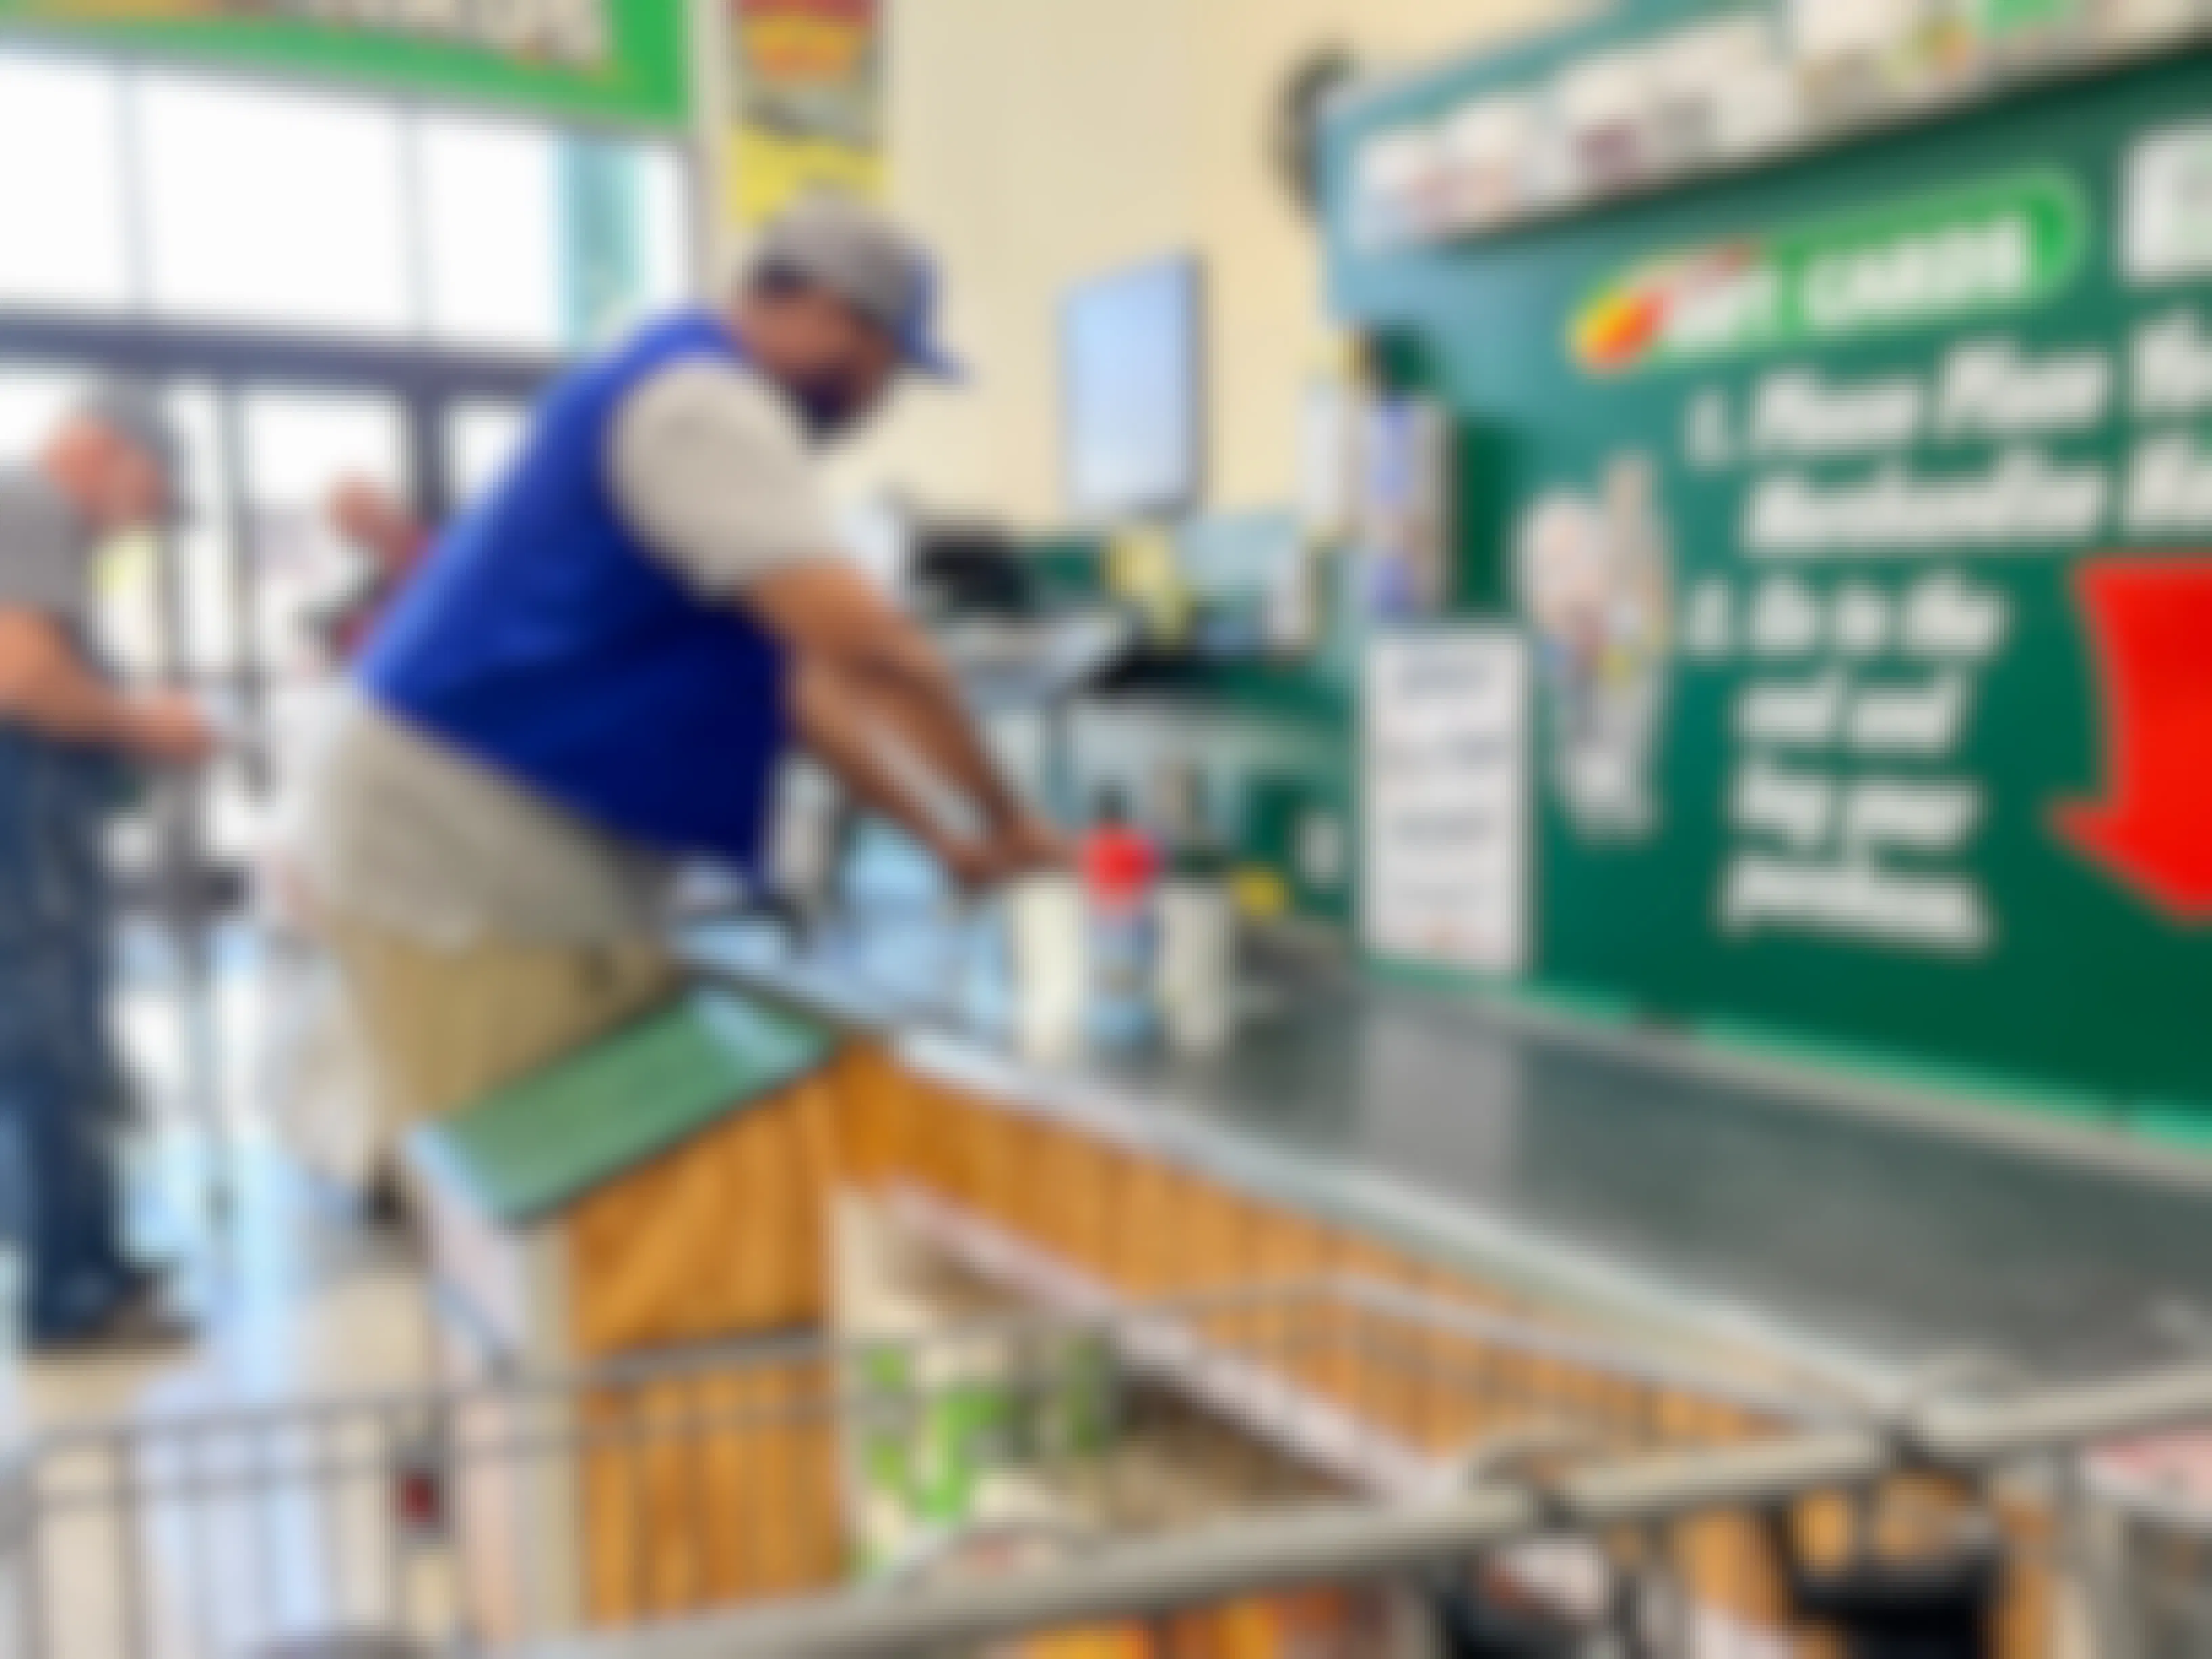 A Menards employee scanning items at the checkout lane.